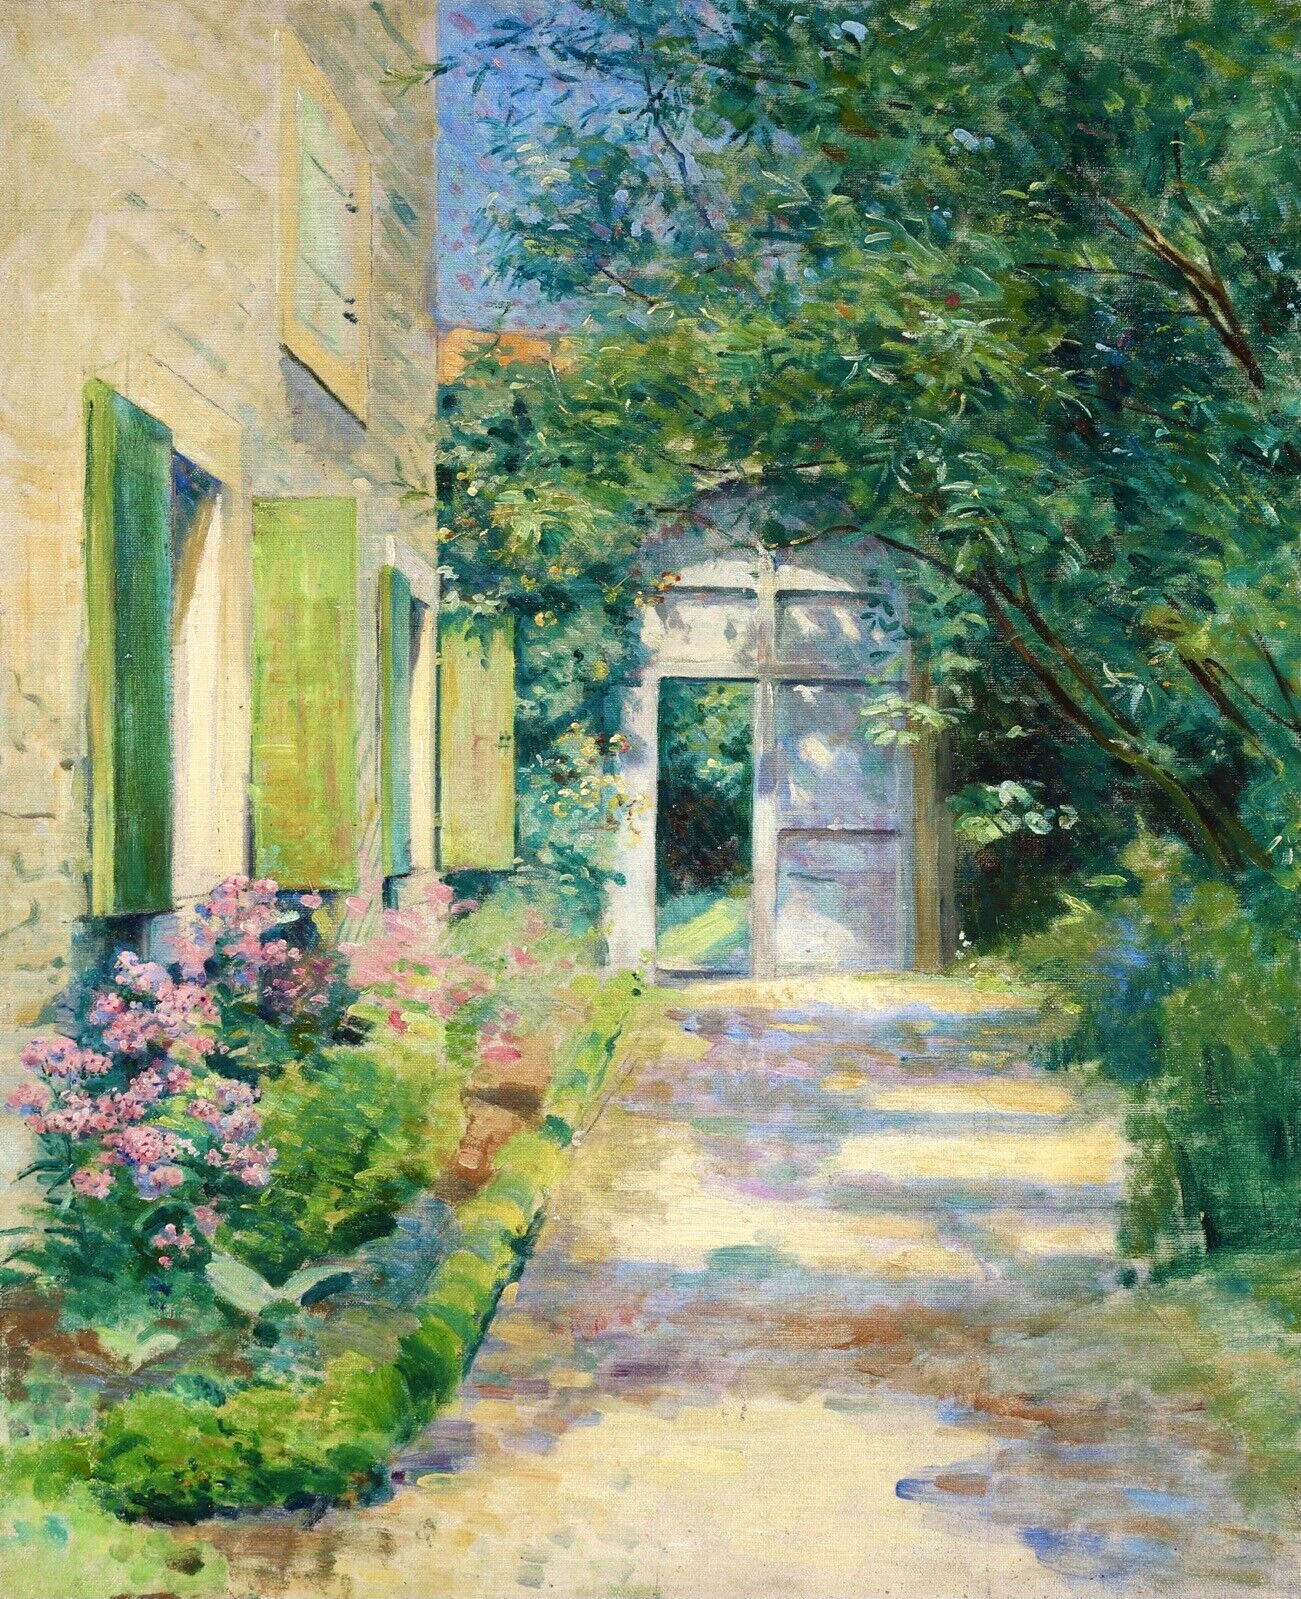 A painting of a home's exterior and garden.